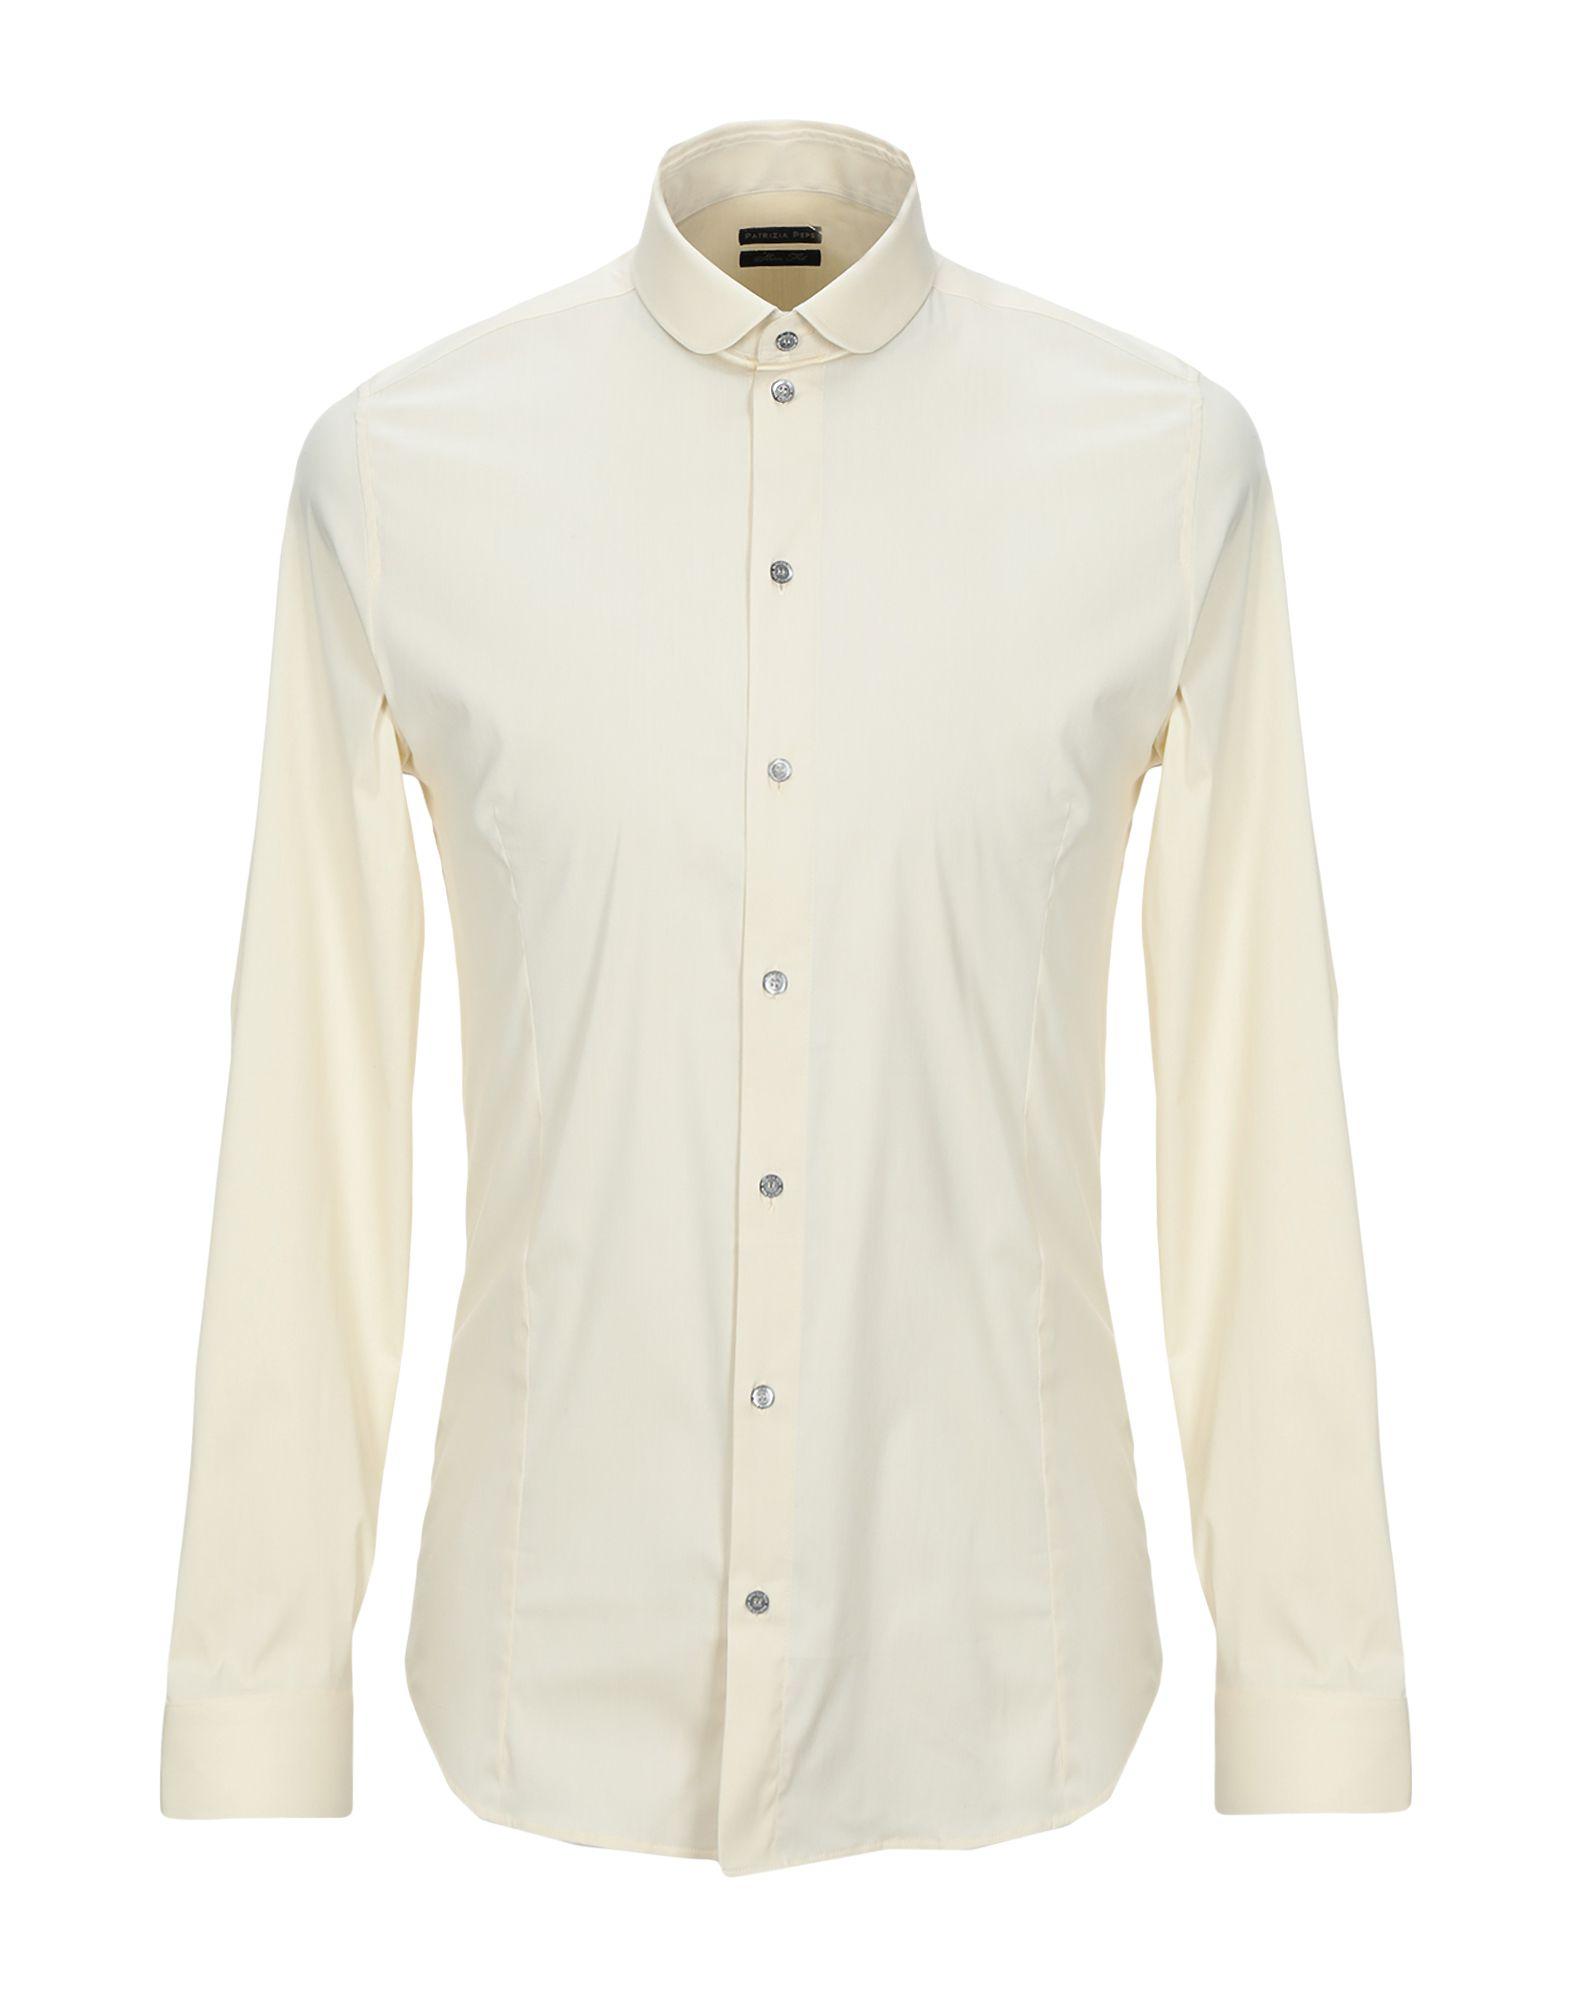 Patrizia Pepe Cotton Shirt in Beige (Natural) for Men - Lyst